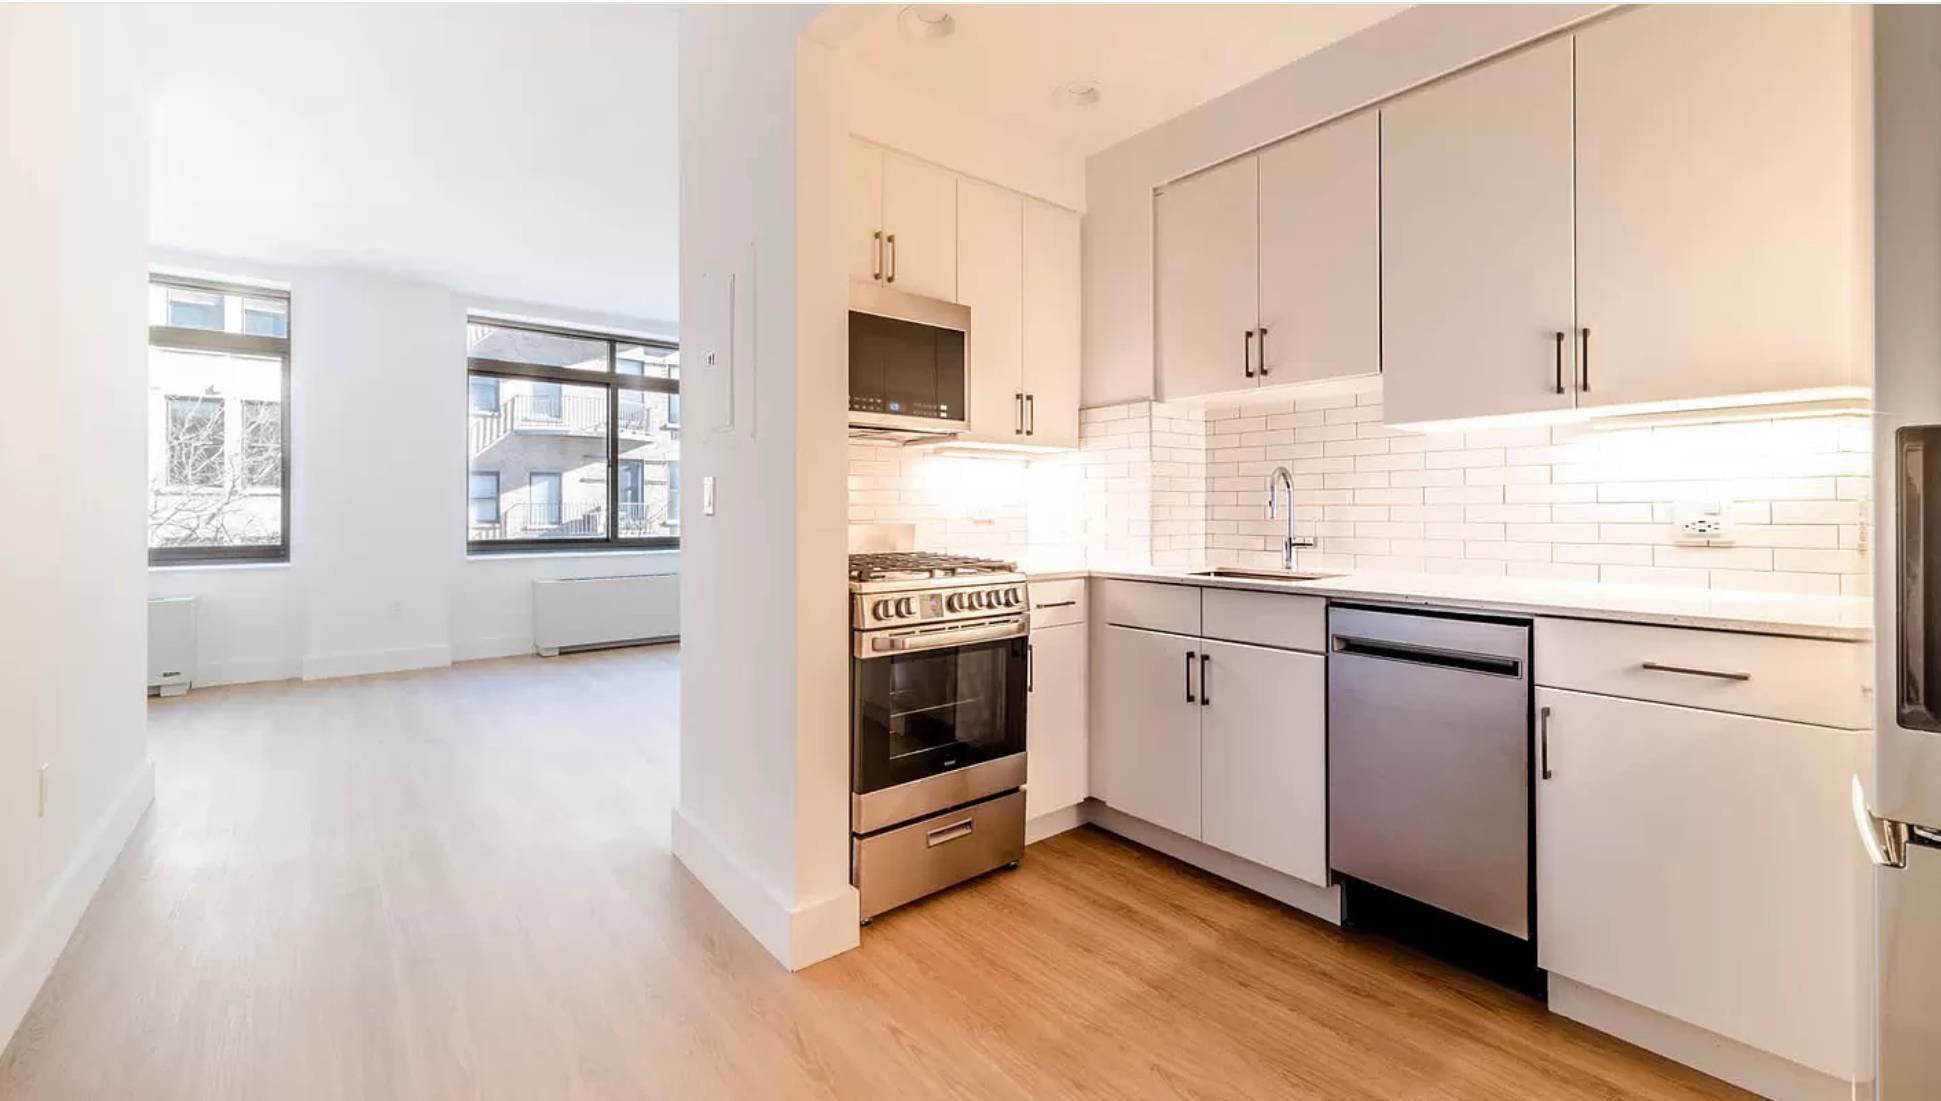 BEAUTIFULLY LAID OUT 1 BED/1 BATH IN PRIME GREENWICH VILLAGE LOCATION